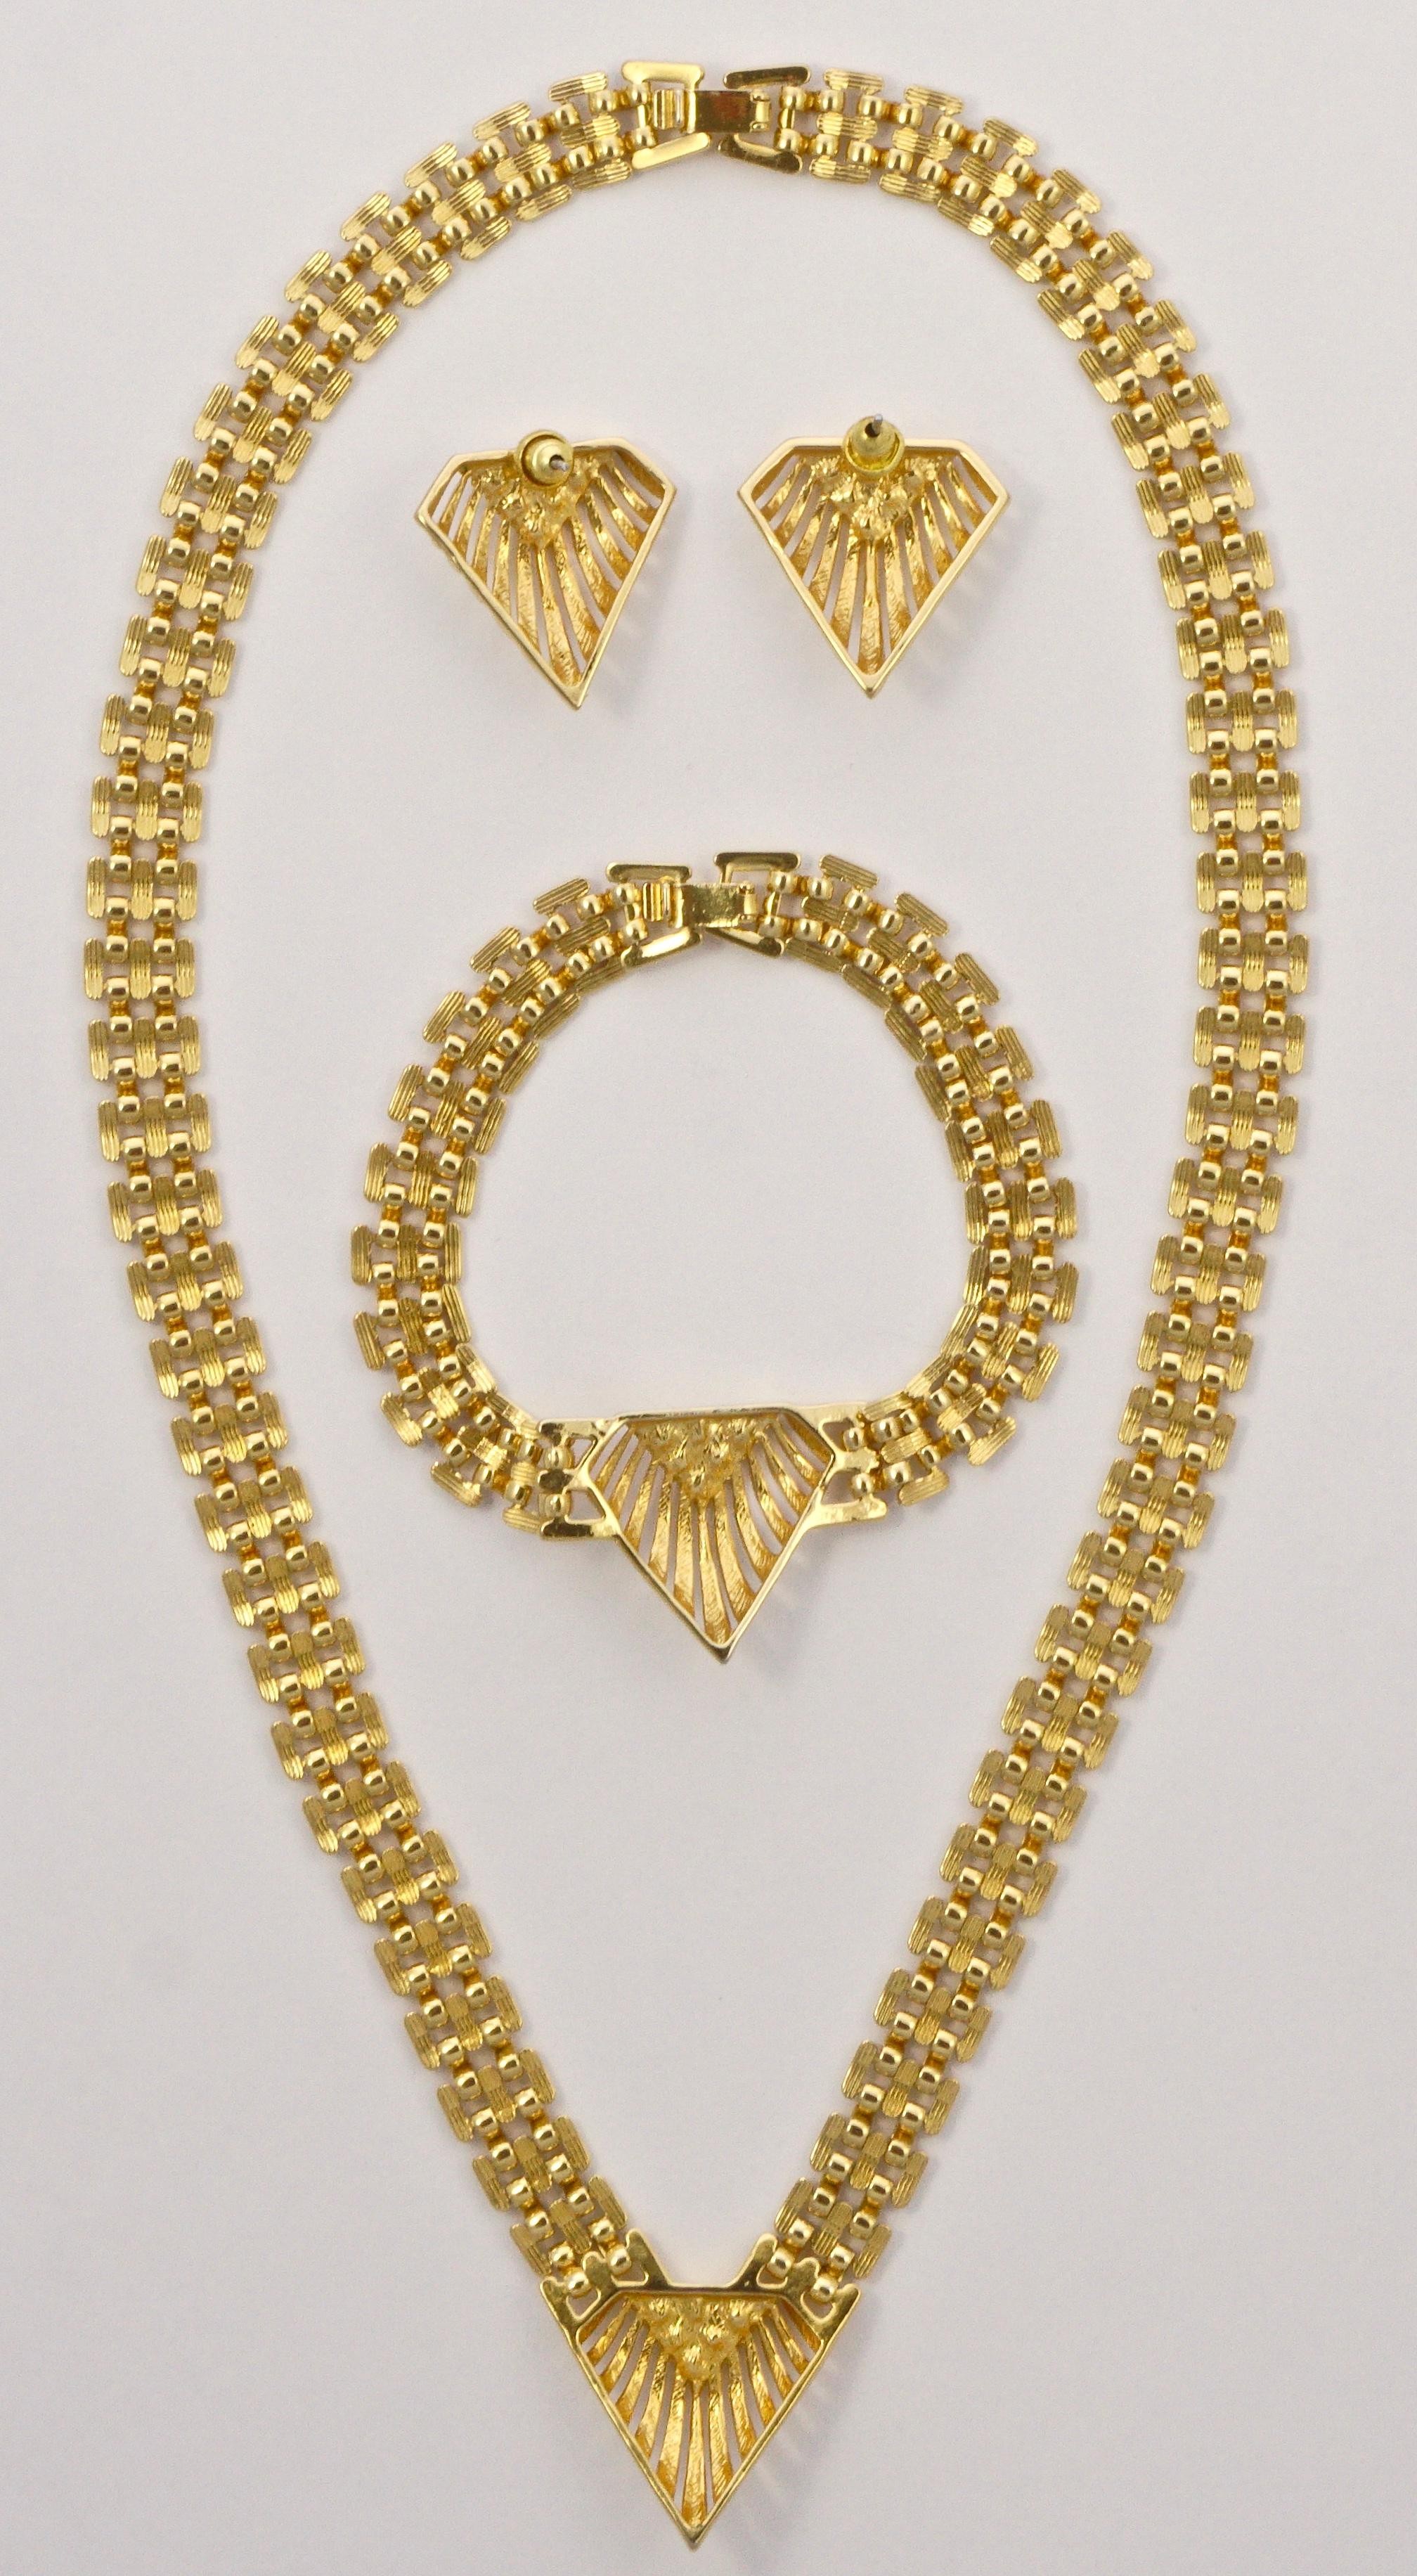 Pierre Cardin Gold Plated and Rhinestones Necklace Bracelet Earrings, 1980s 4